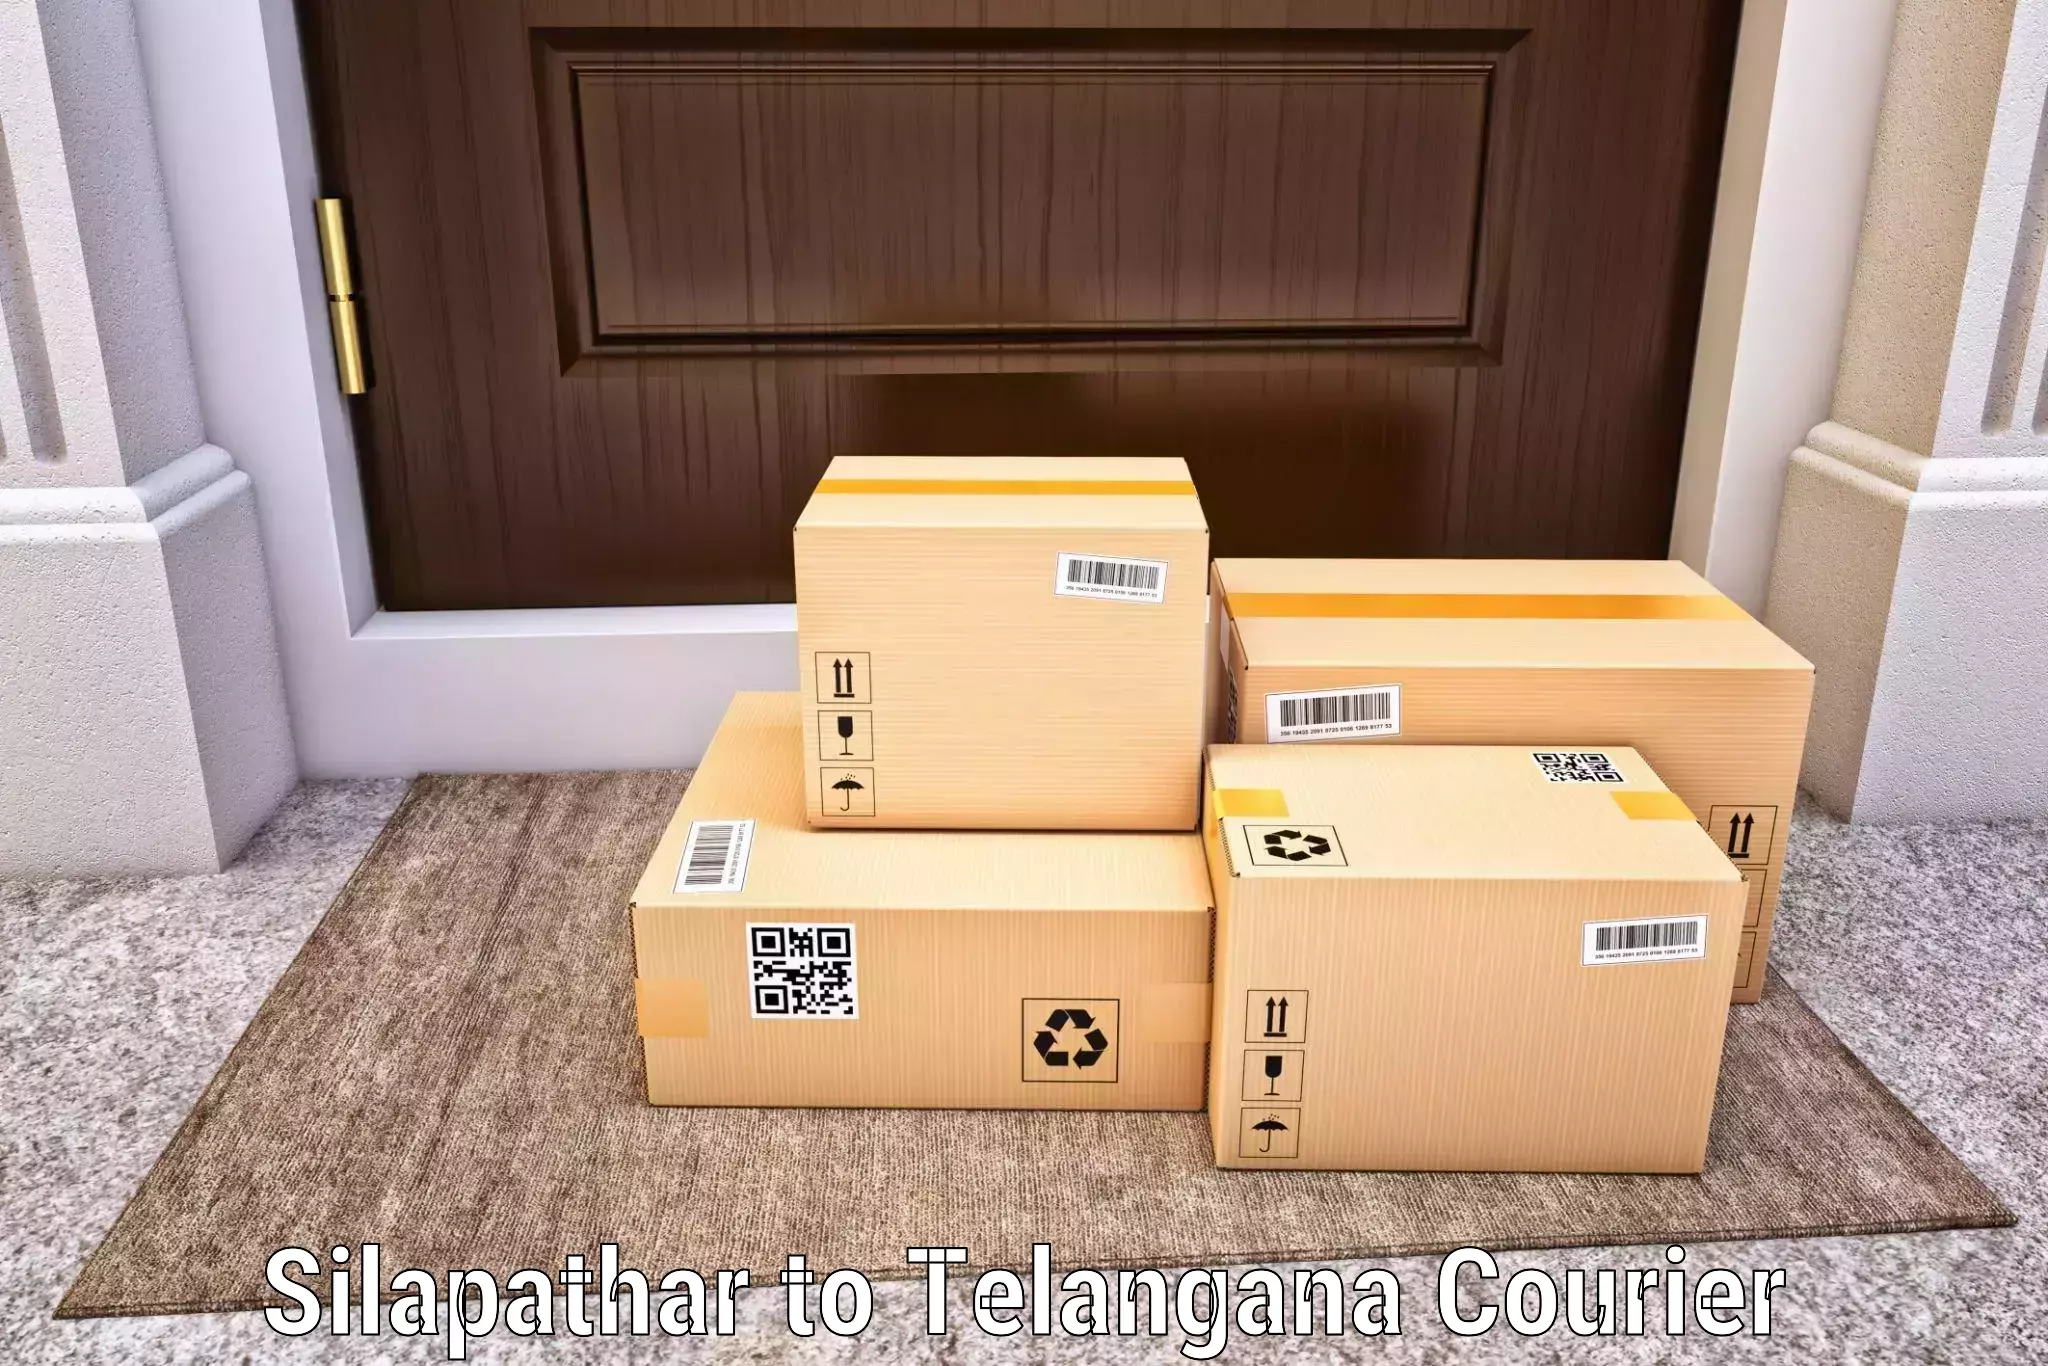 Expedited parcel delivery in Silapathar to Kamalapur